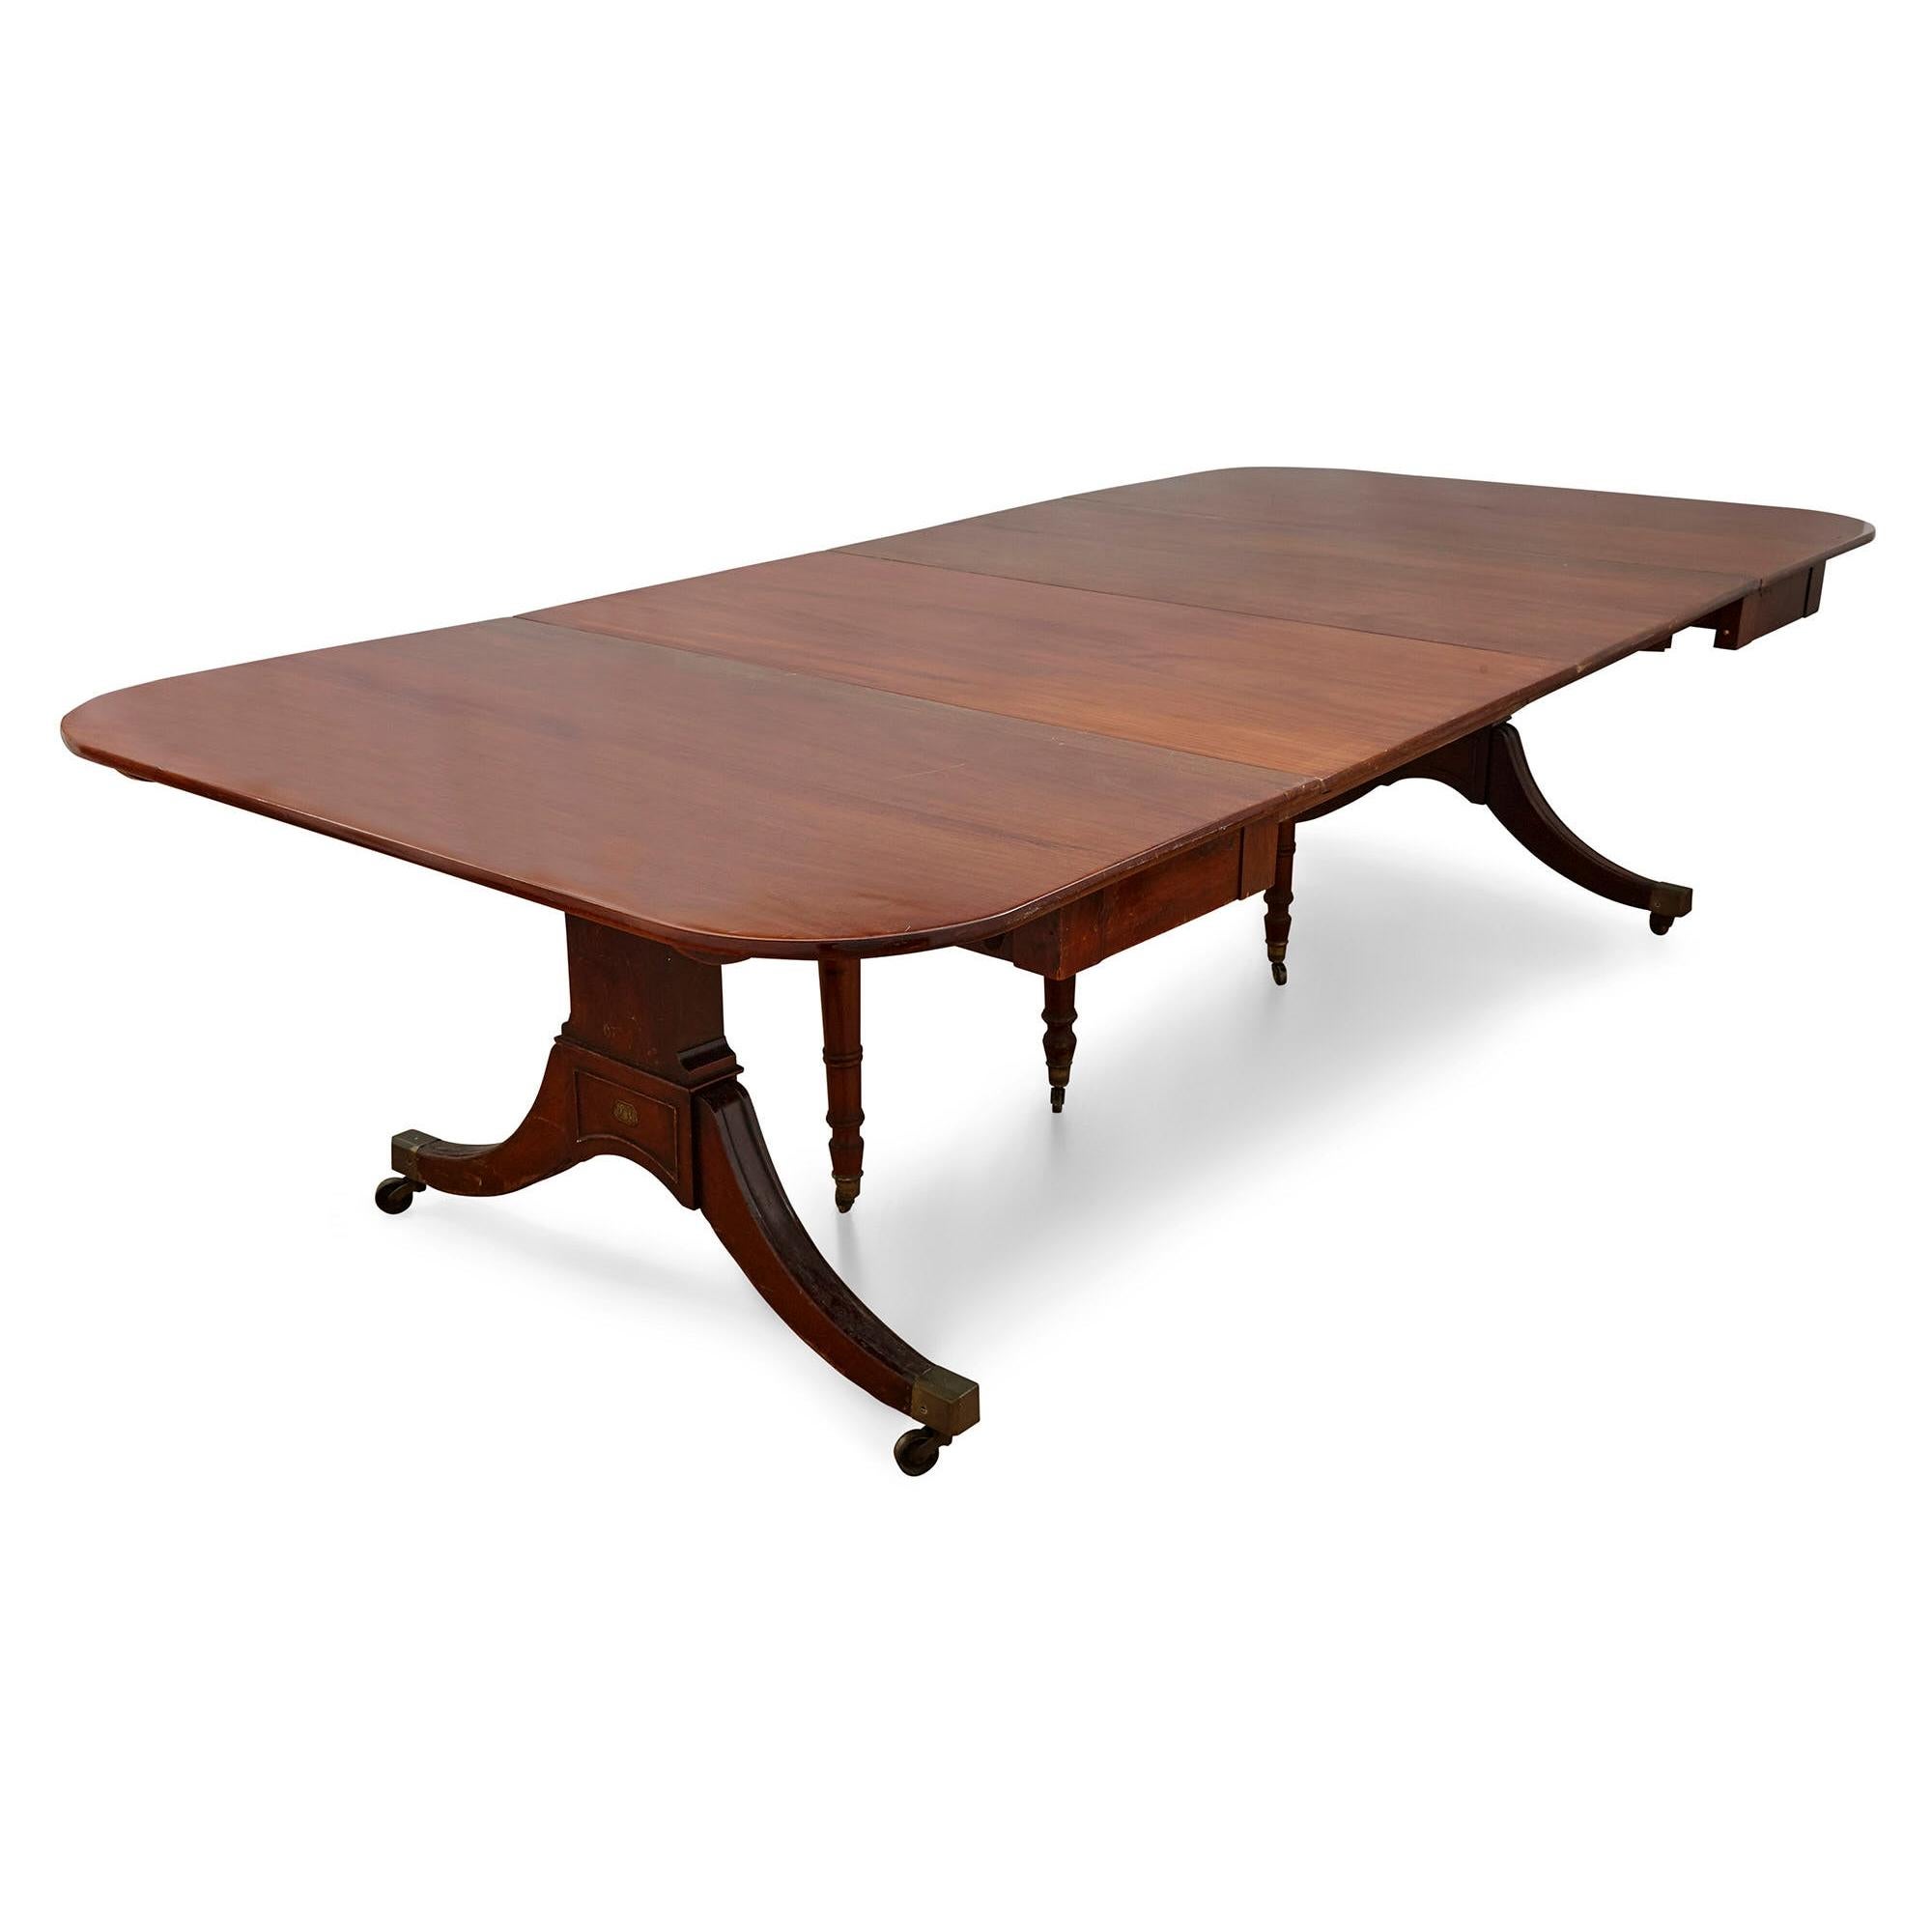 Early 19th century 'Cumberland' mahogany dining table by David Edwards
English, early 19th century
Dimensions: Height 71cm, width 397cm, depth 131cm

This 'Cumberland' table, possibly named after Windsor's Cumberland Lodge, is an extendable